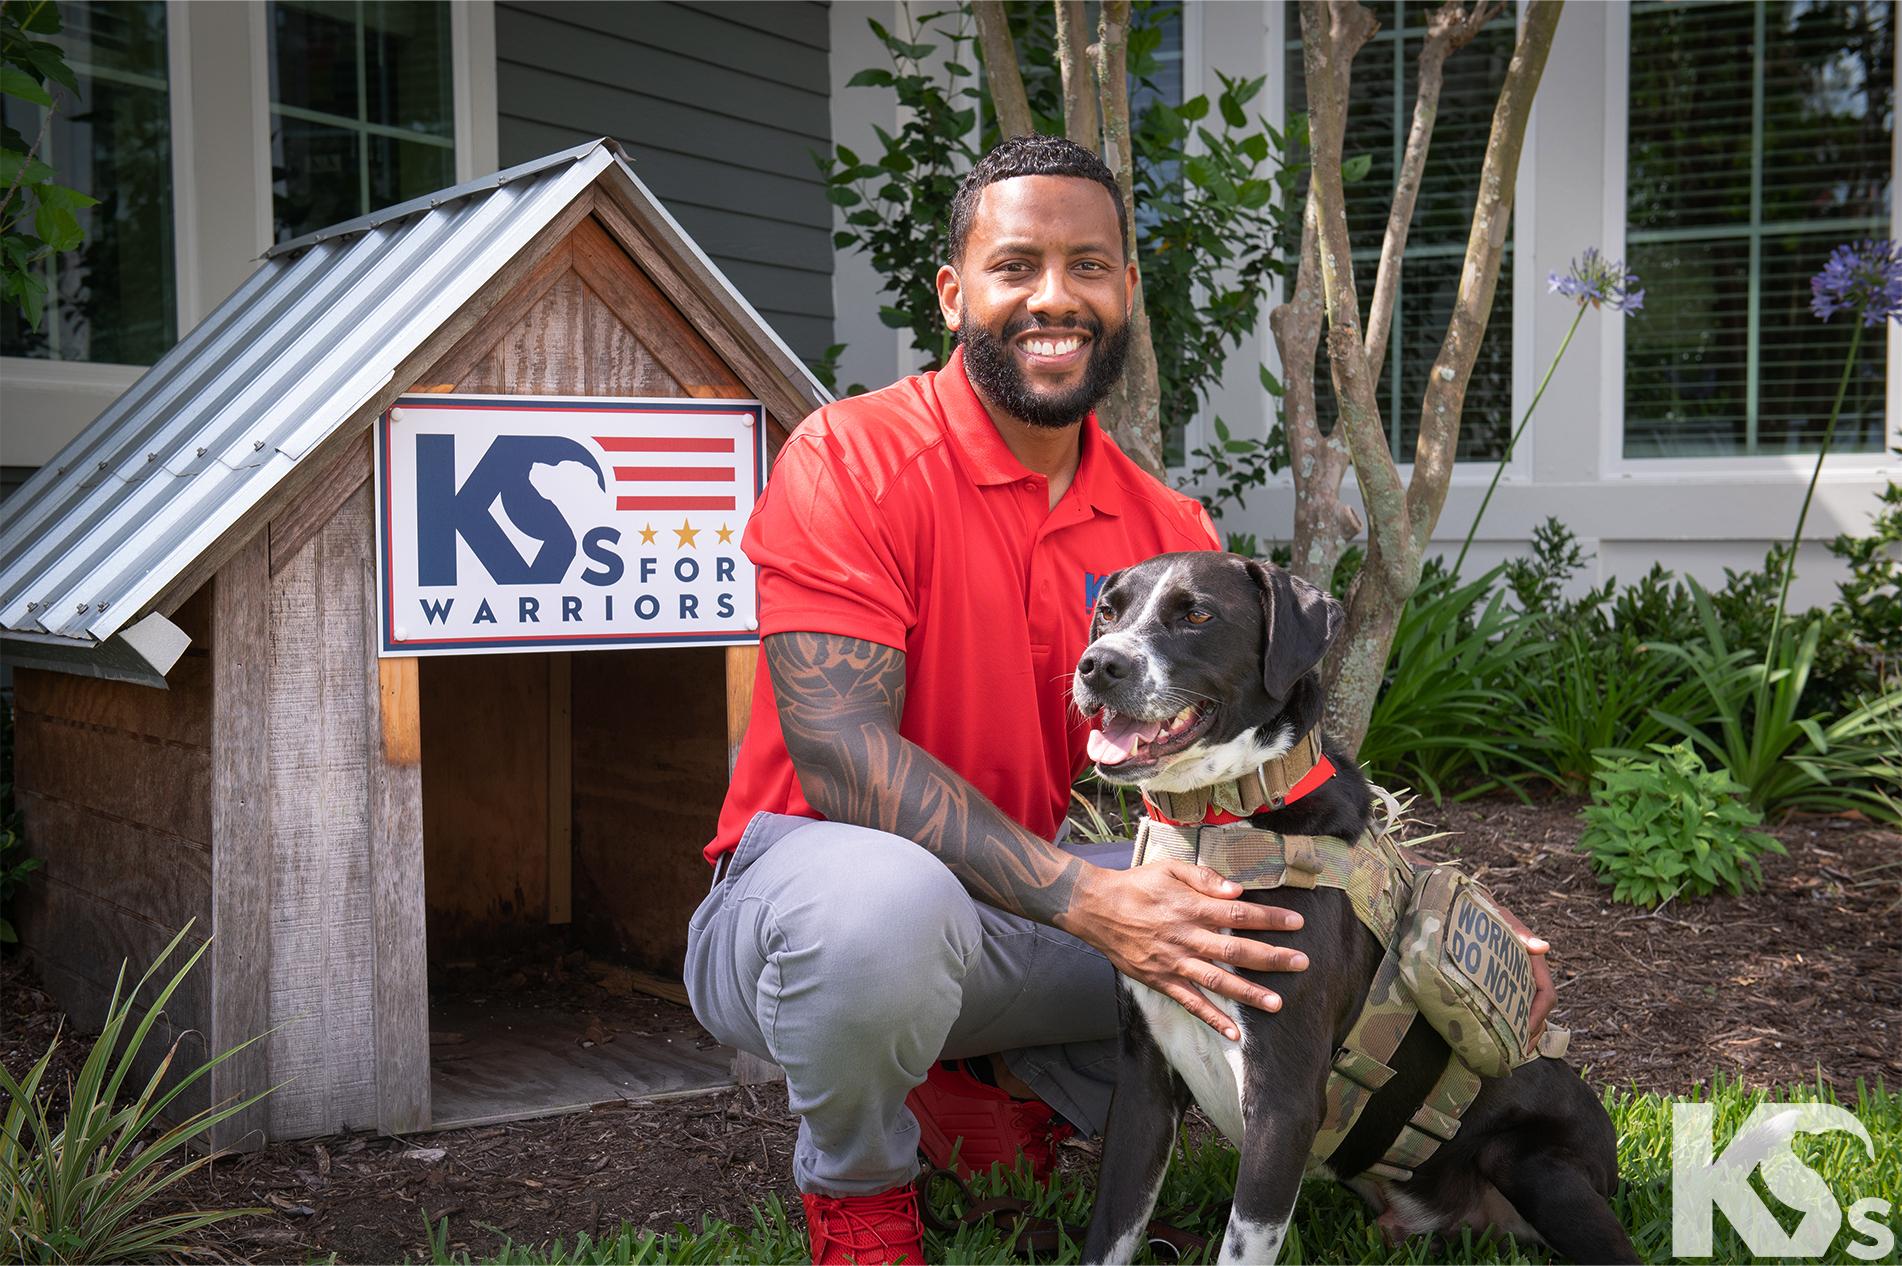 K9s For Warriors Gives Veterans & Shelter Dogs a New Leash on Life